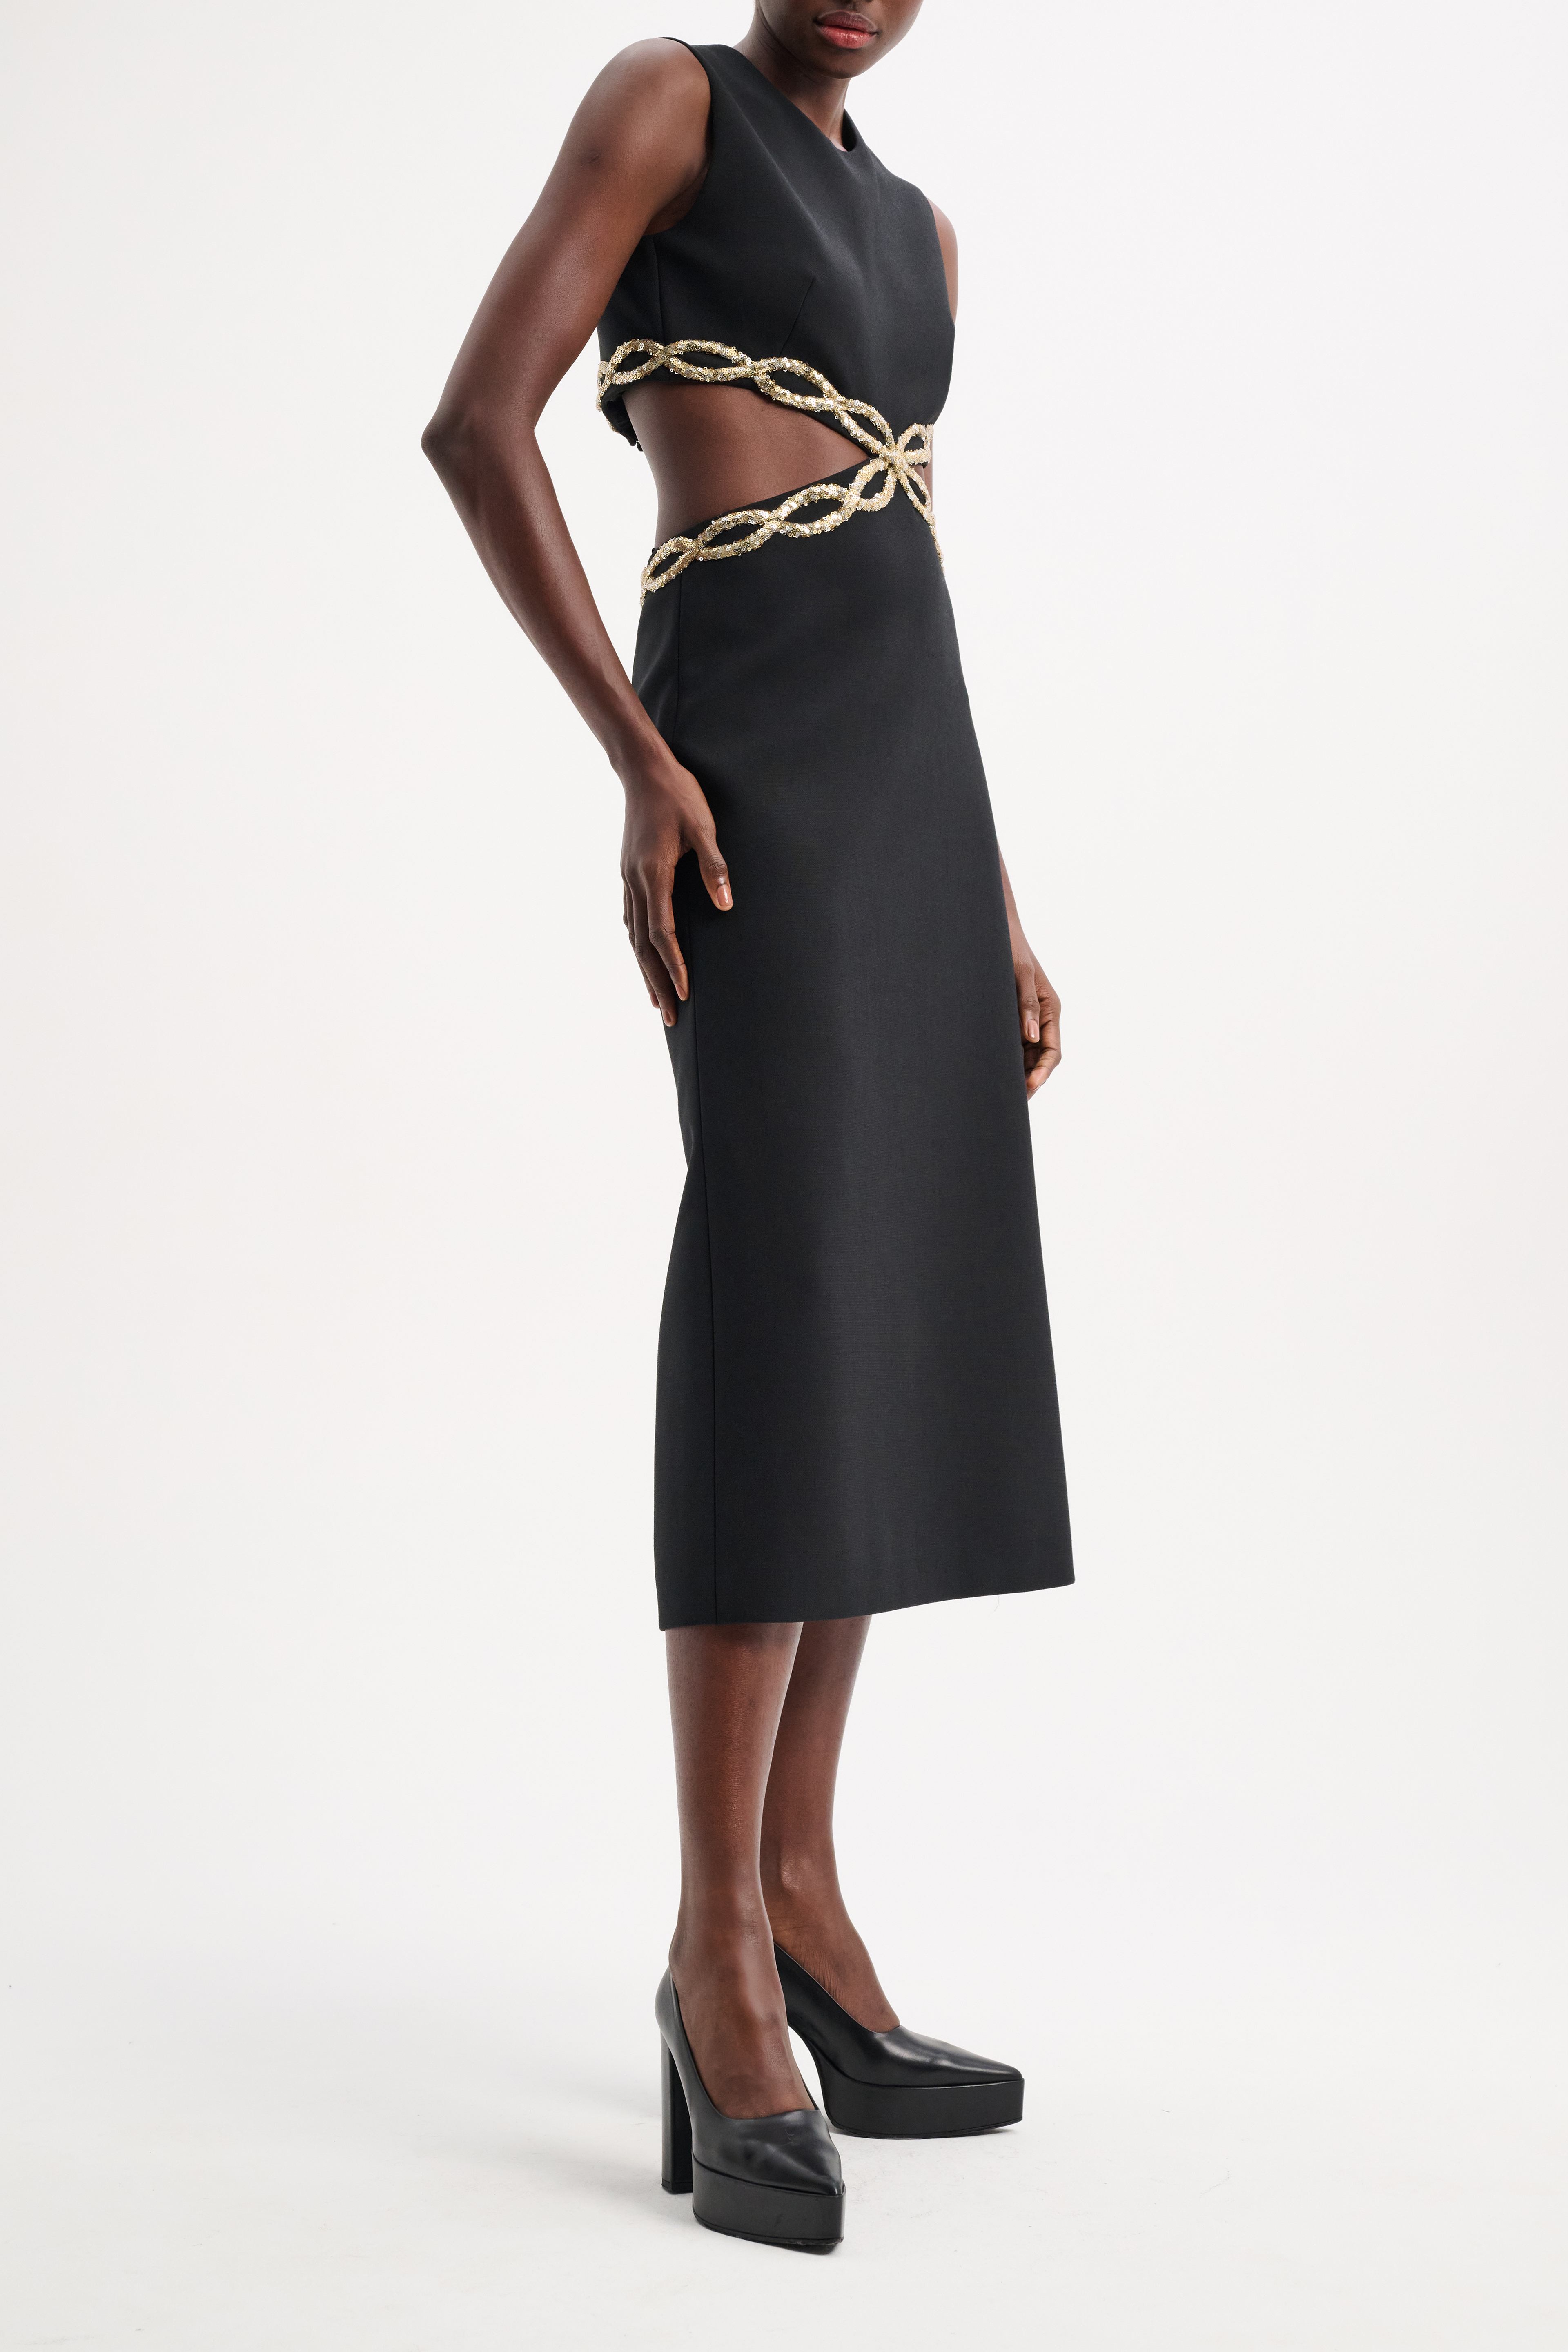 Dorothee Schumacher Sleeveless long dress with sequin embellished